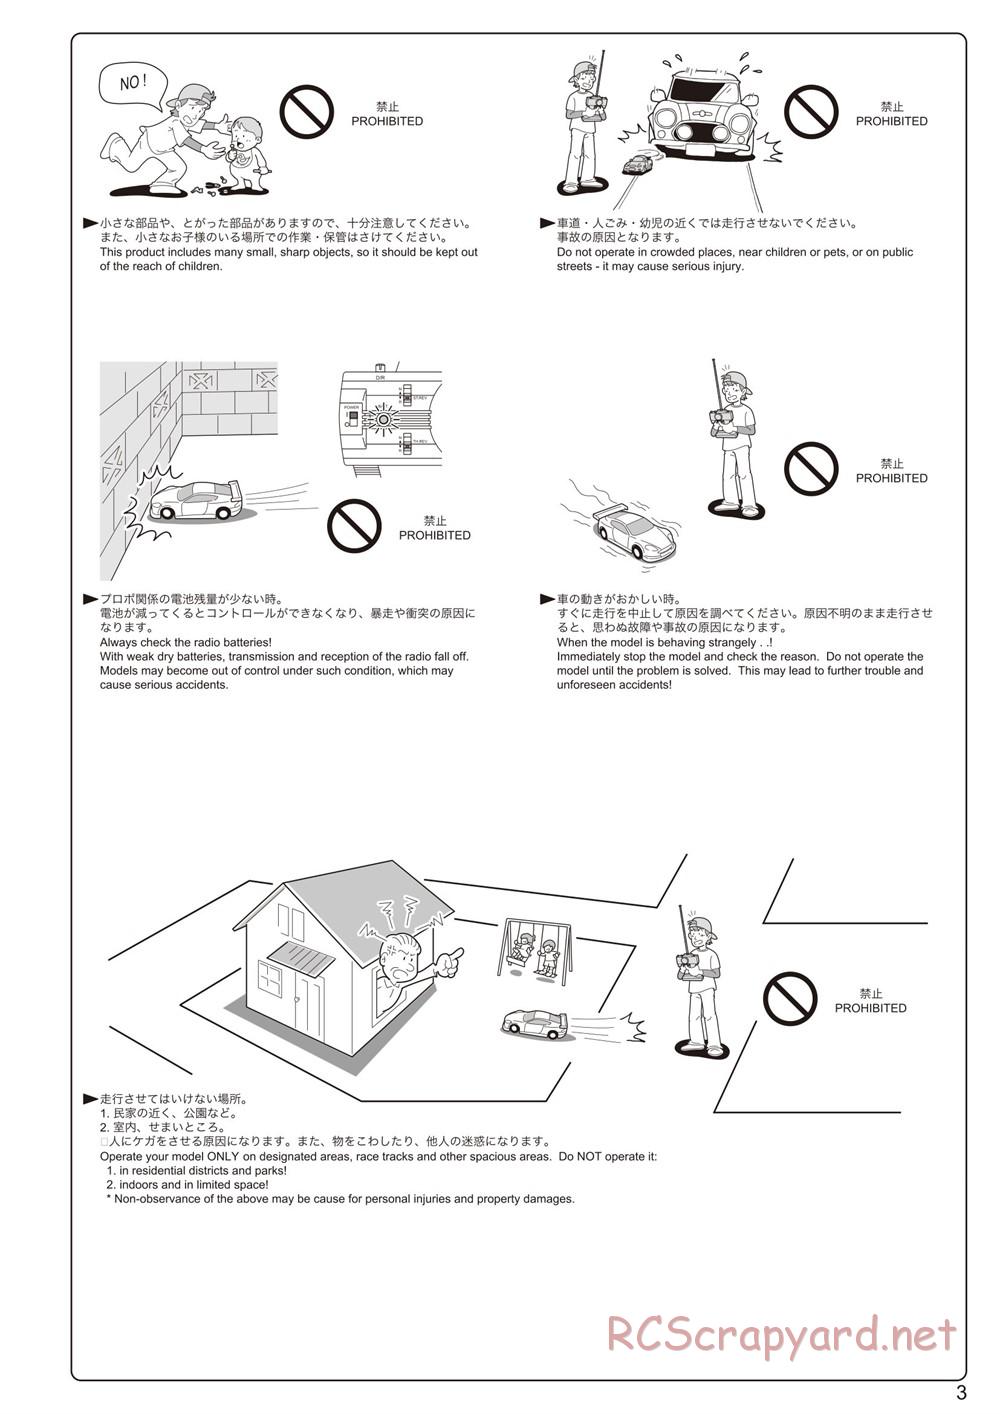 Kyosho - Ultima RB6 (2015) - Manual - Page 3